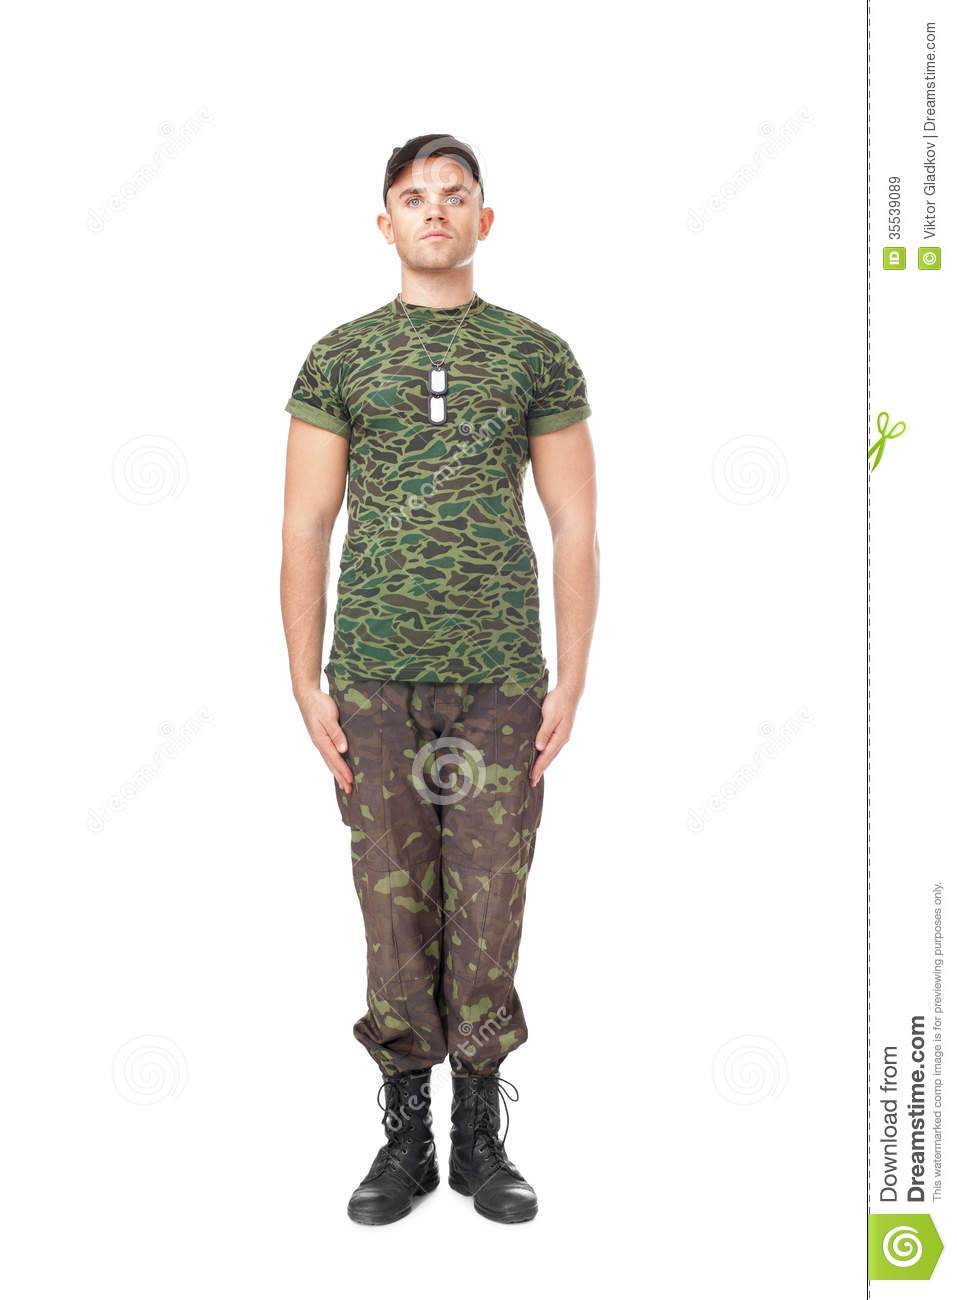 Young Army Soldier Standing In Attention Isolated On White Background